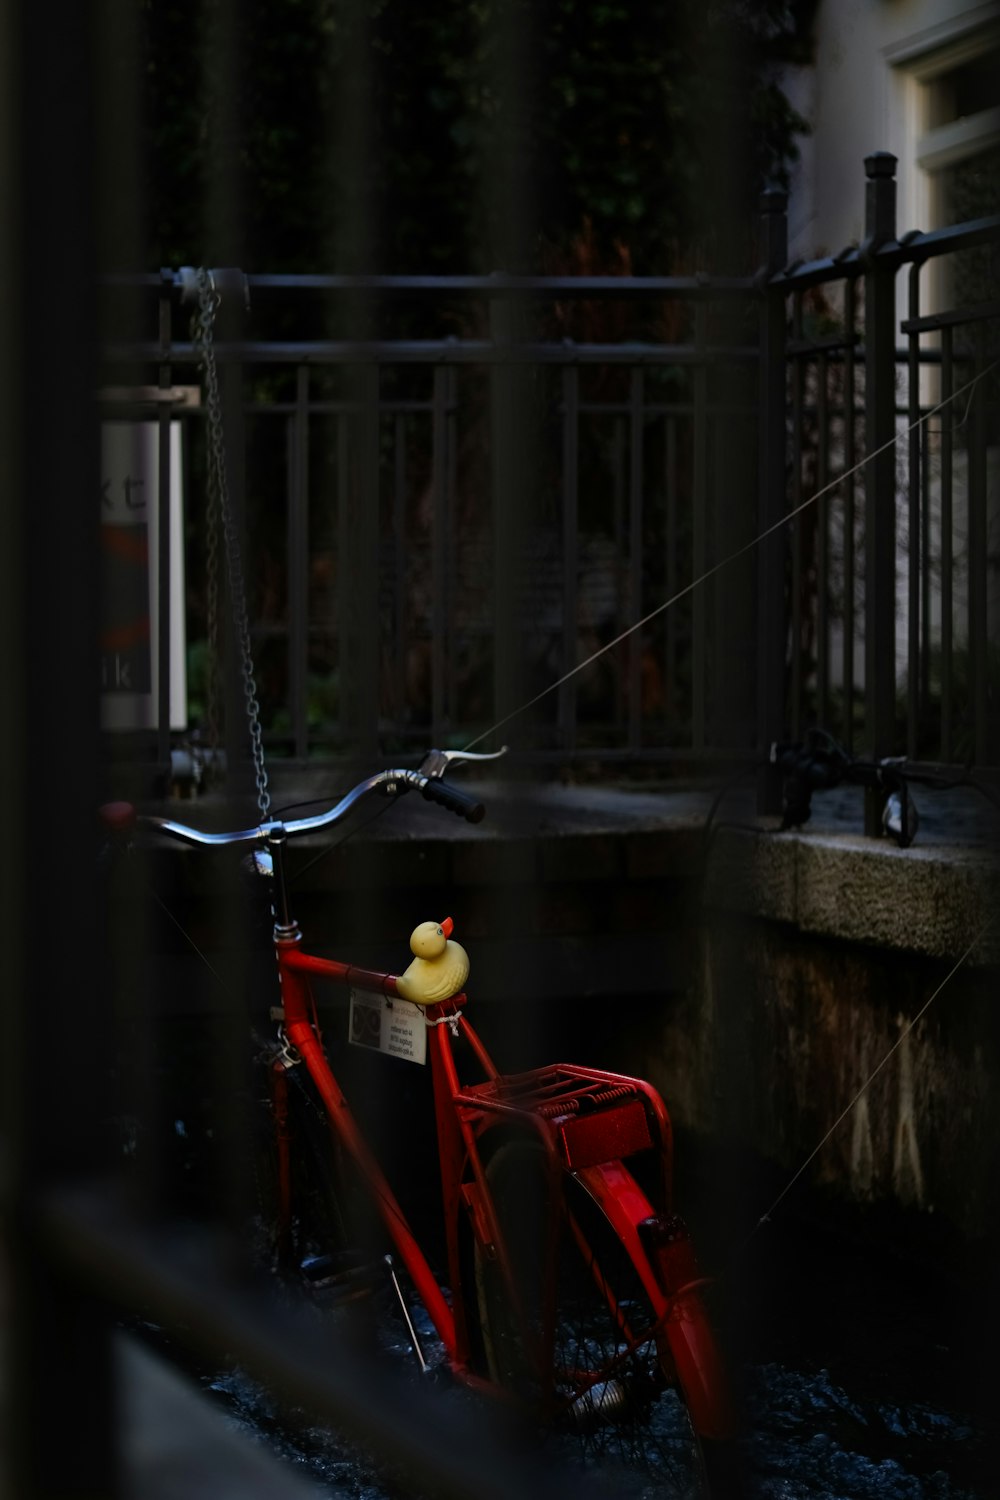 a rubber duck sitting on the back of a red bike